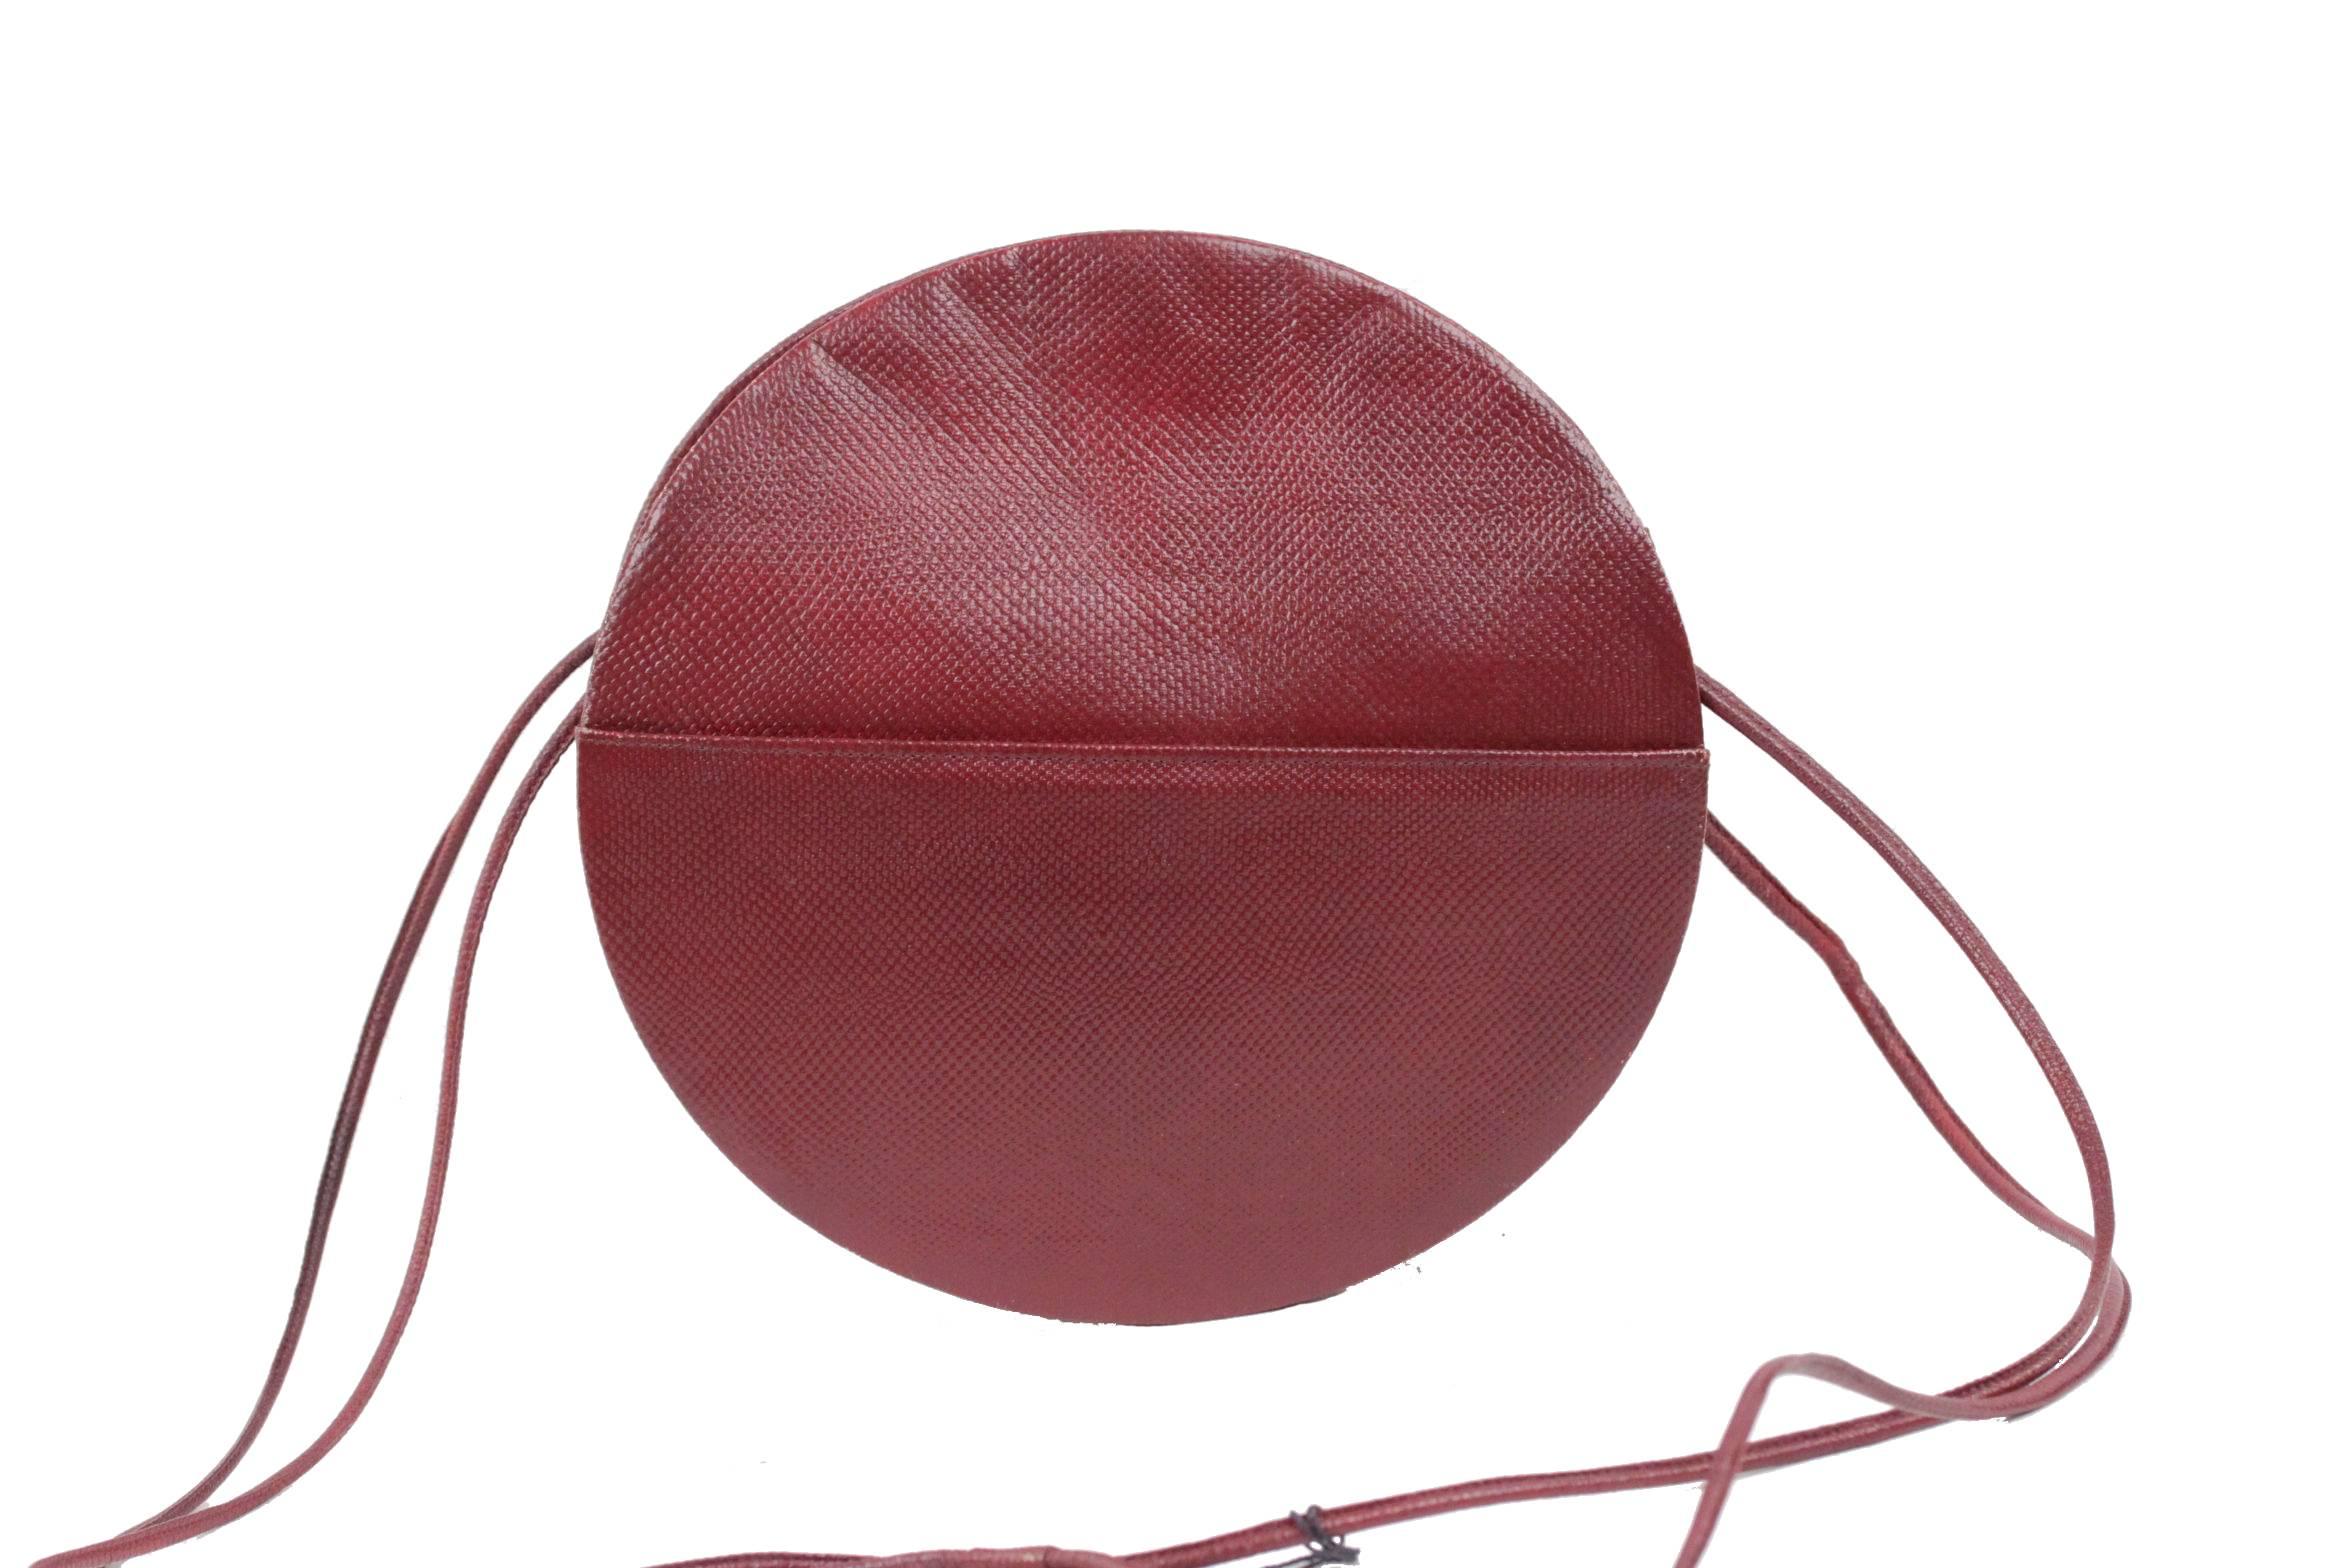  - Vintage Burgundy Shoulder Bag by ANDREA PFISTER
- Round shape
- 1 open pocket on the exterior on each side
- Upper magnetic button closure
- Gold tone lining
- 2 main sections with 1 side zip pocket & 1 side open pocket
- Approx.